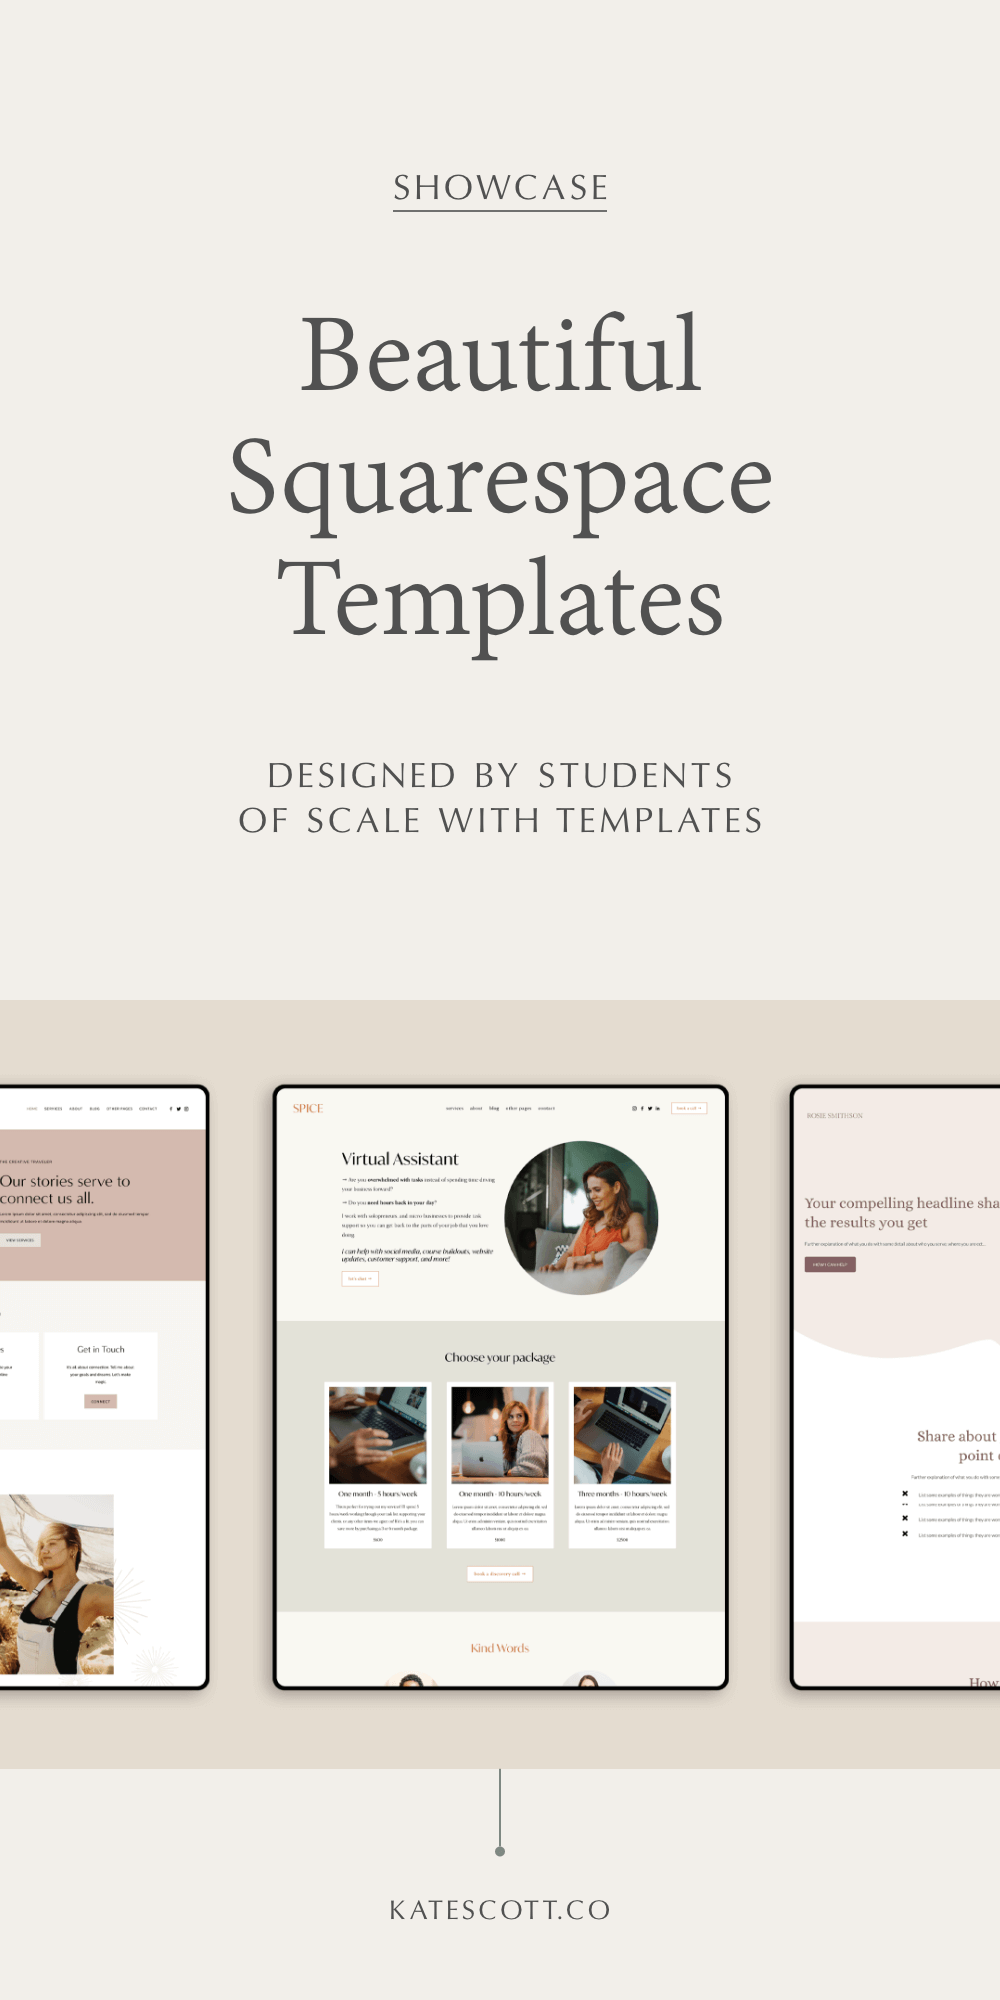 Check out these beautiful Squarespace 7.1 templates designed by students of my course, Scale with Templates!